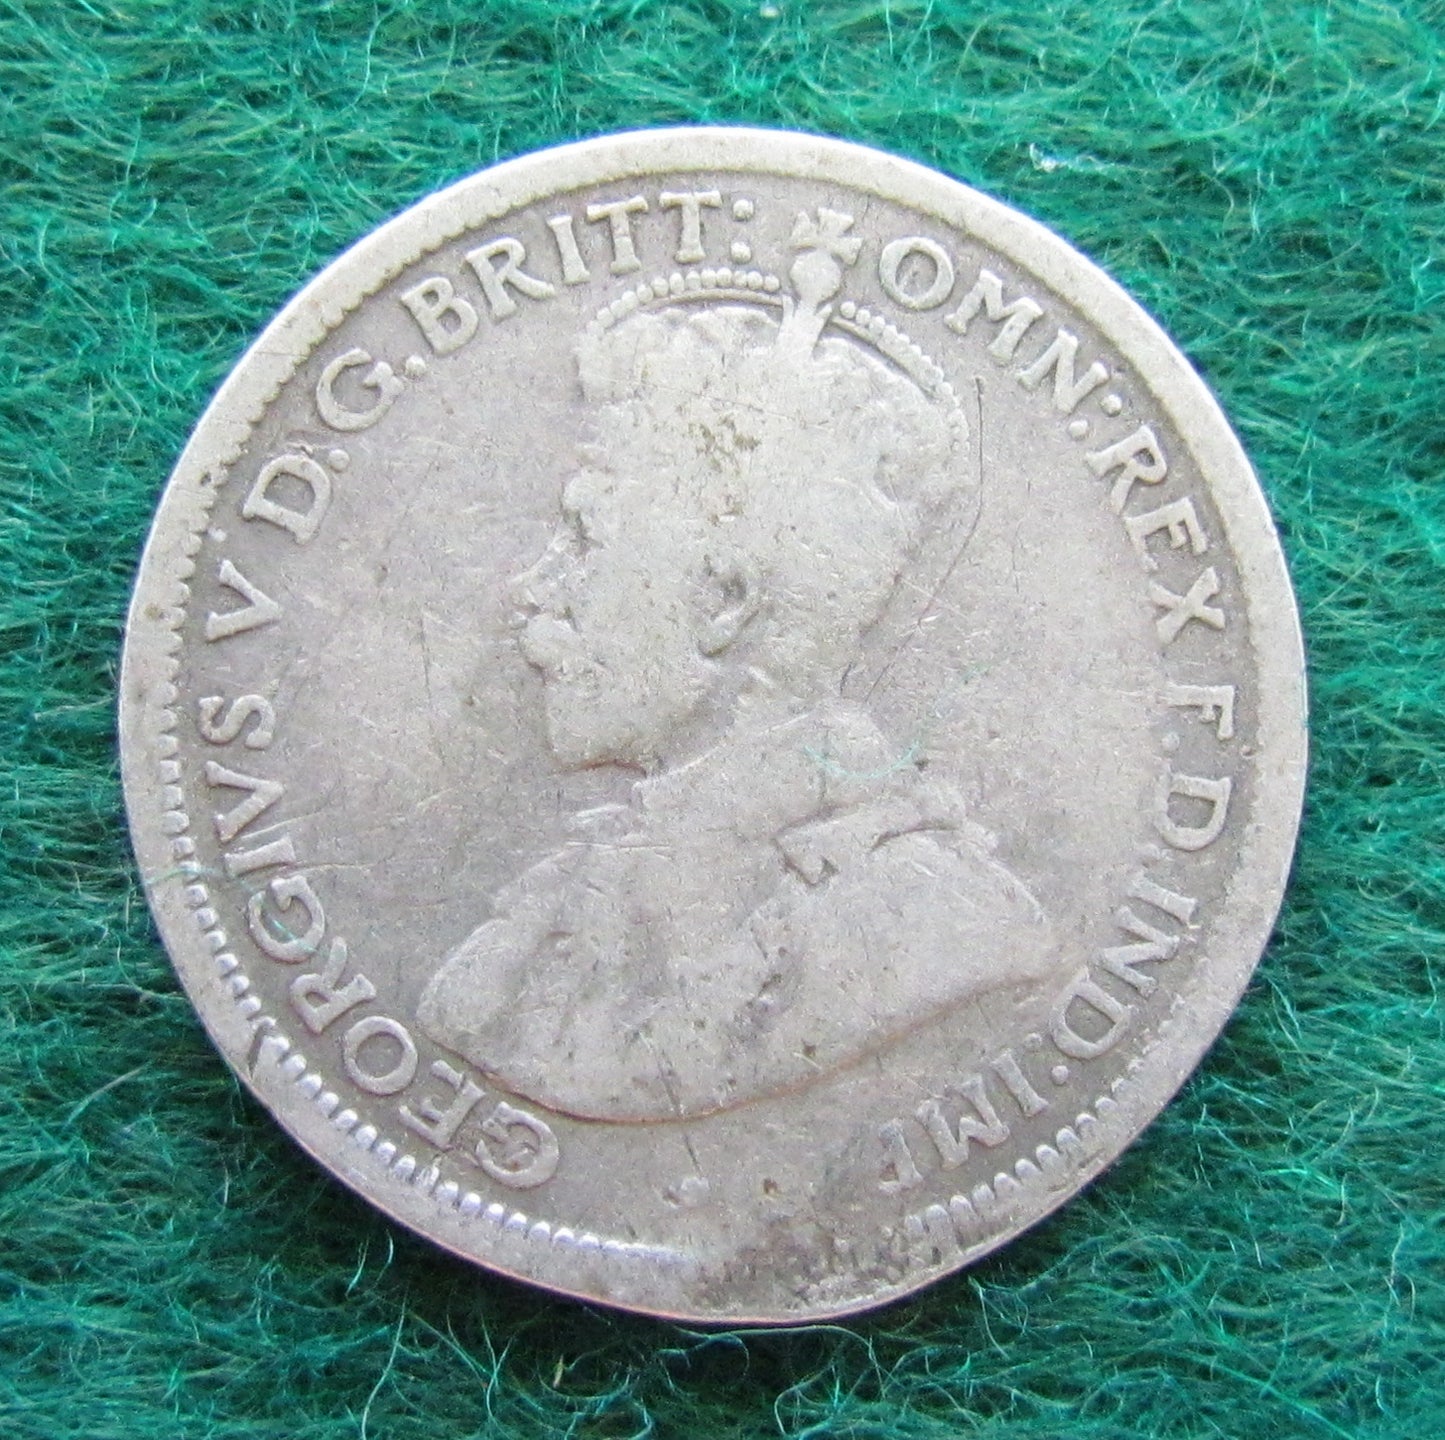 Australian 1918 M 6d Sixpence King George V Coin - Circulated